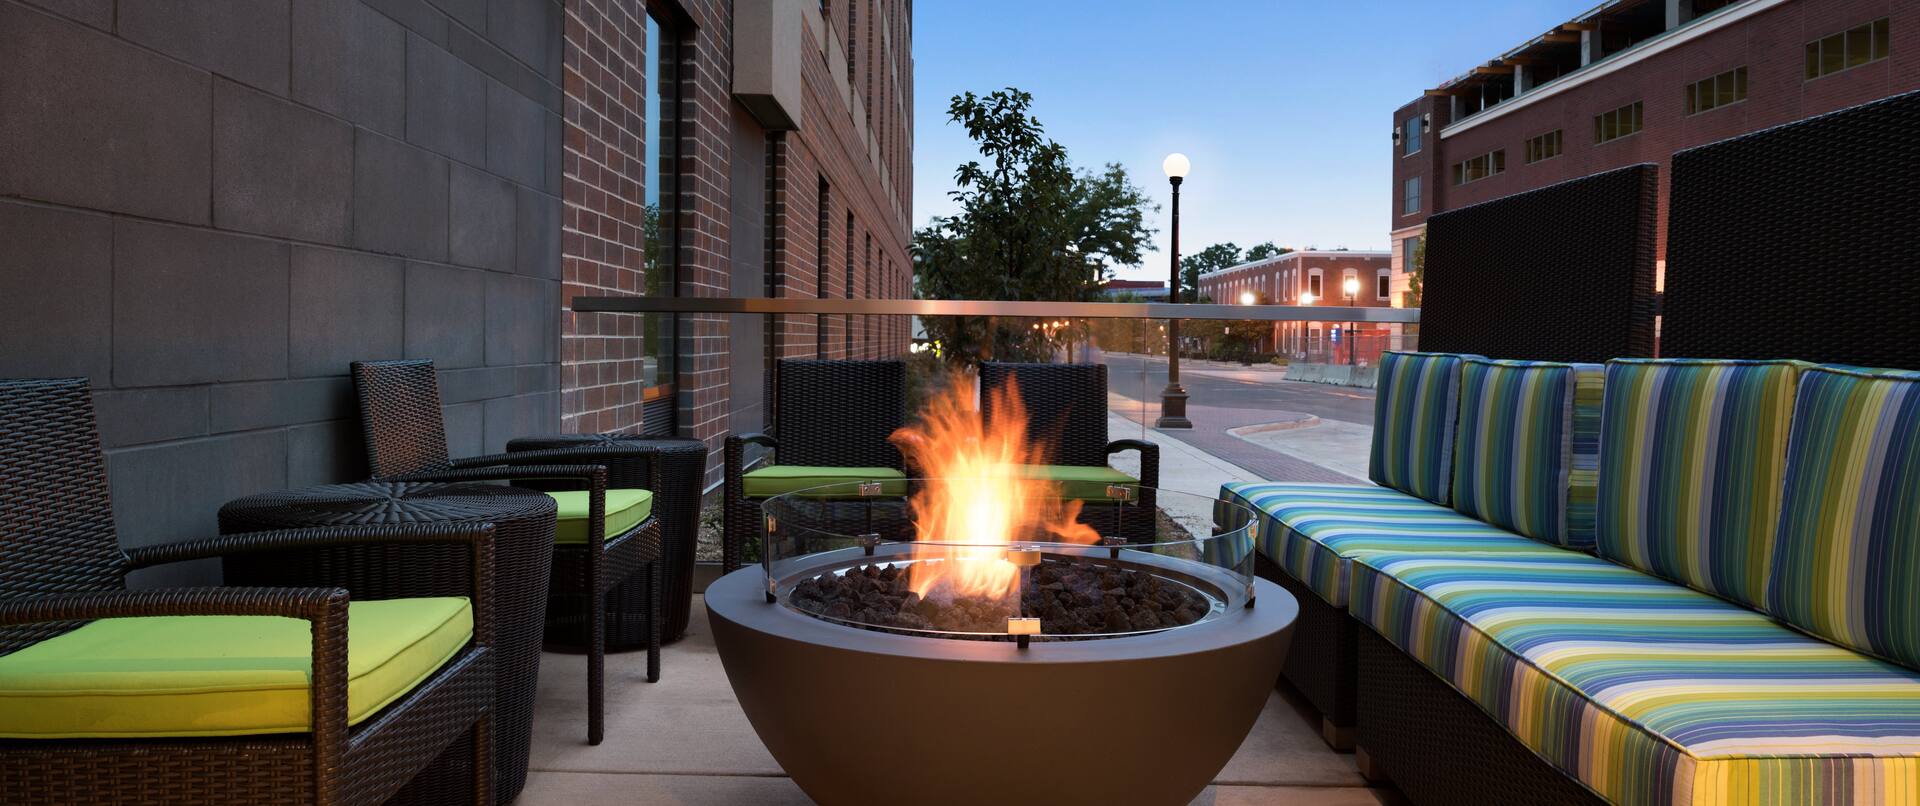 Outdoor Lounge With Cushioned Armchairs, Round Fire Pit, and Striped Sofas at Dusk